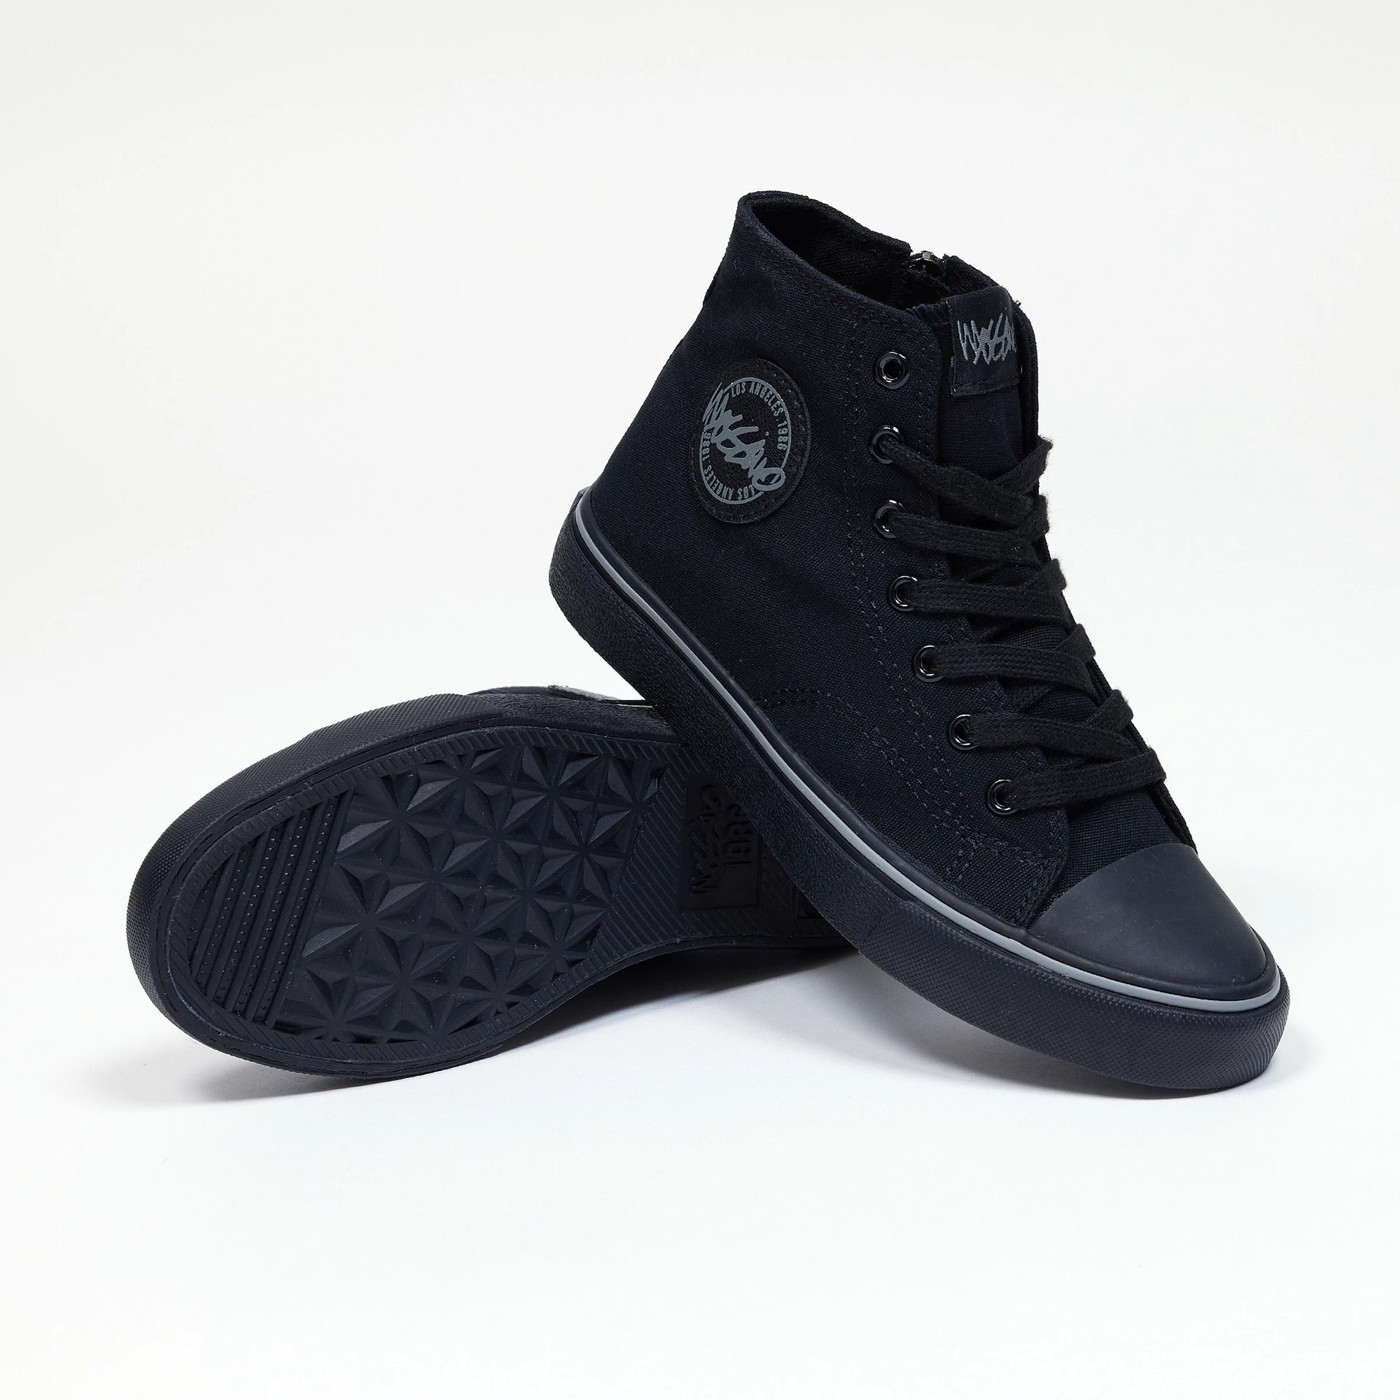 Mossimo Supply Co Lenia Sneakers Black Low Top Target